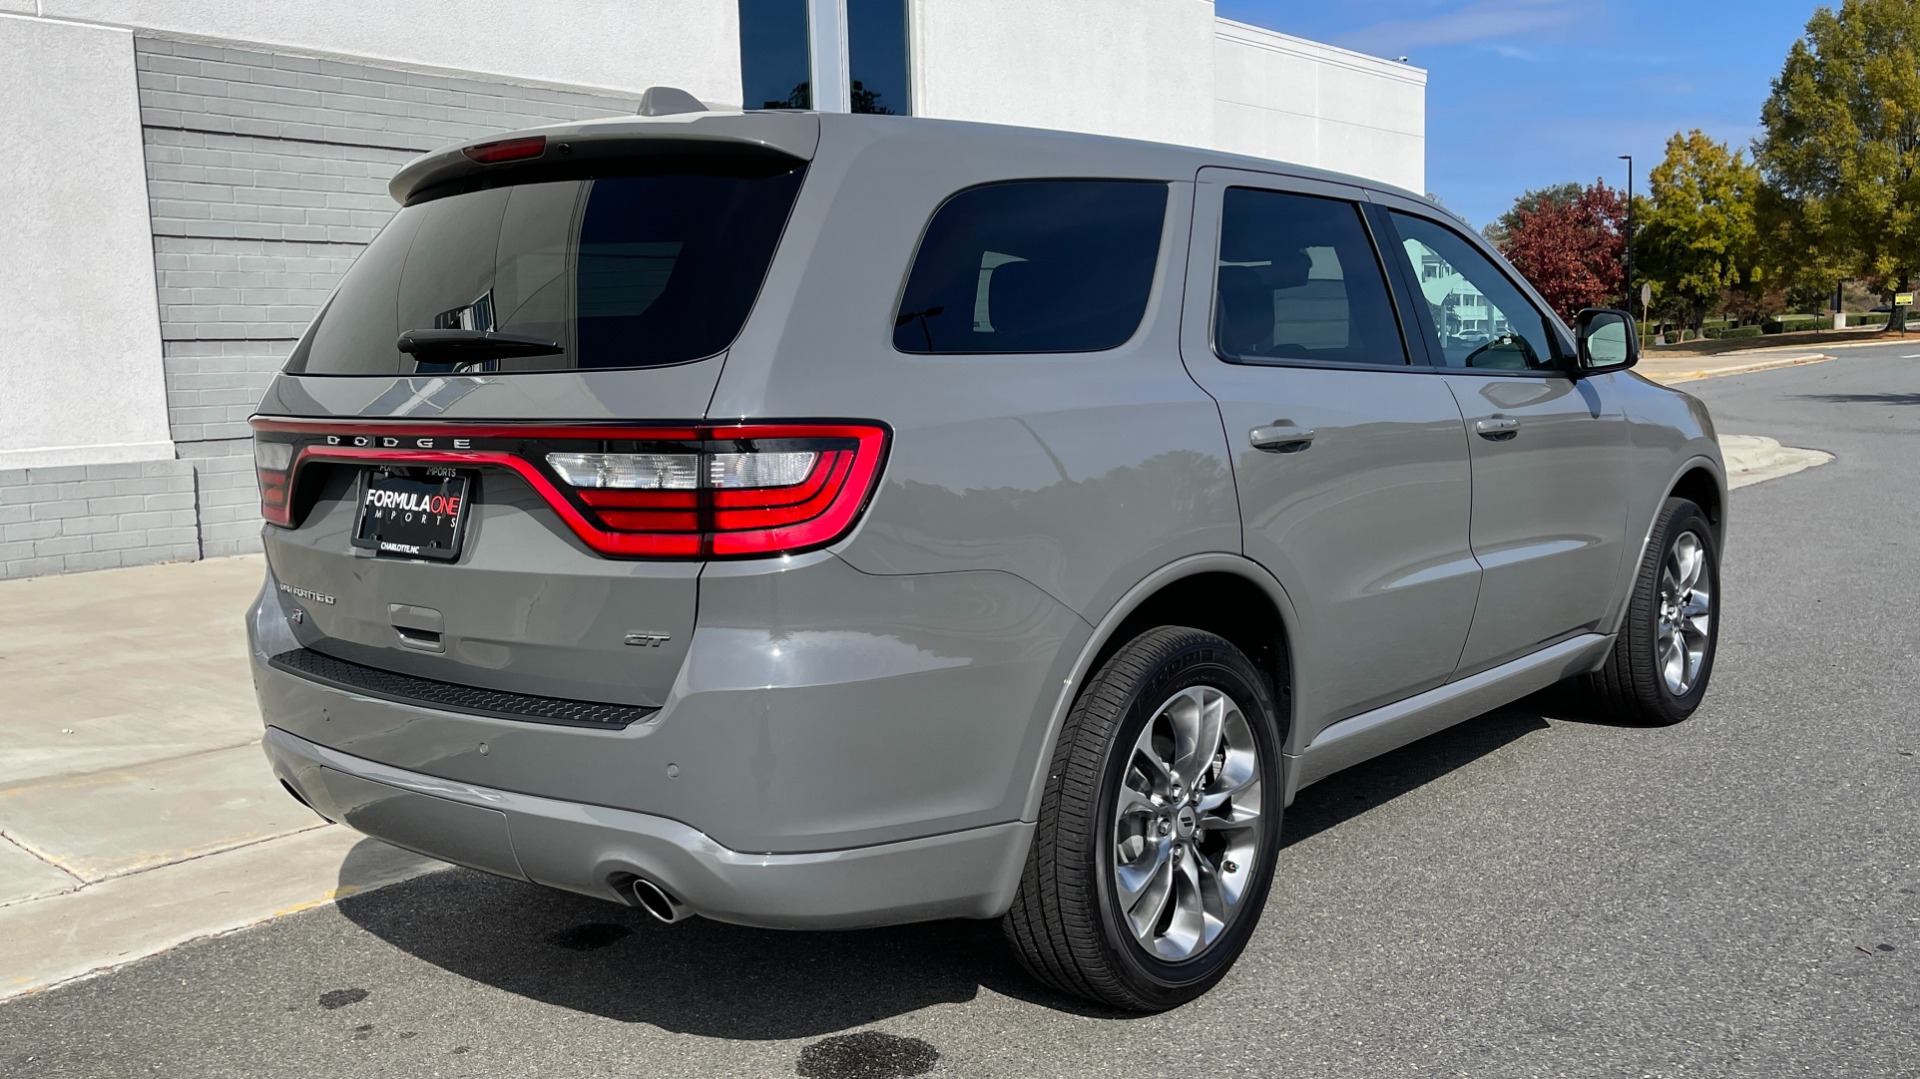 Used 2020 Dodge DURANGO GT PLUS AWD 3.6L / 8-SPD AUTO / ALPINE / 3-ROW / REARVIEW for sale $40,695 at Formula Imports in Charlotte NC 28227 7